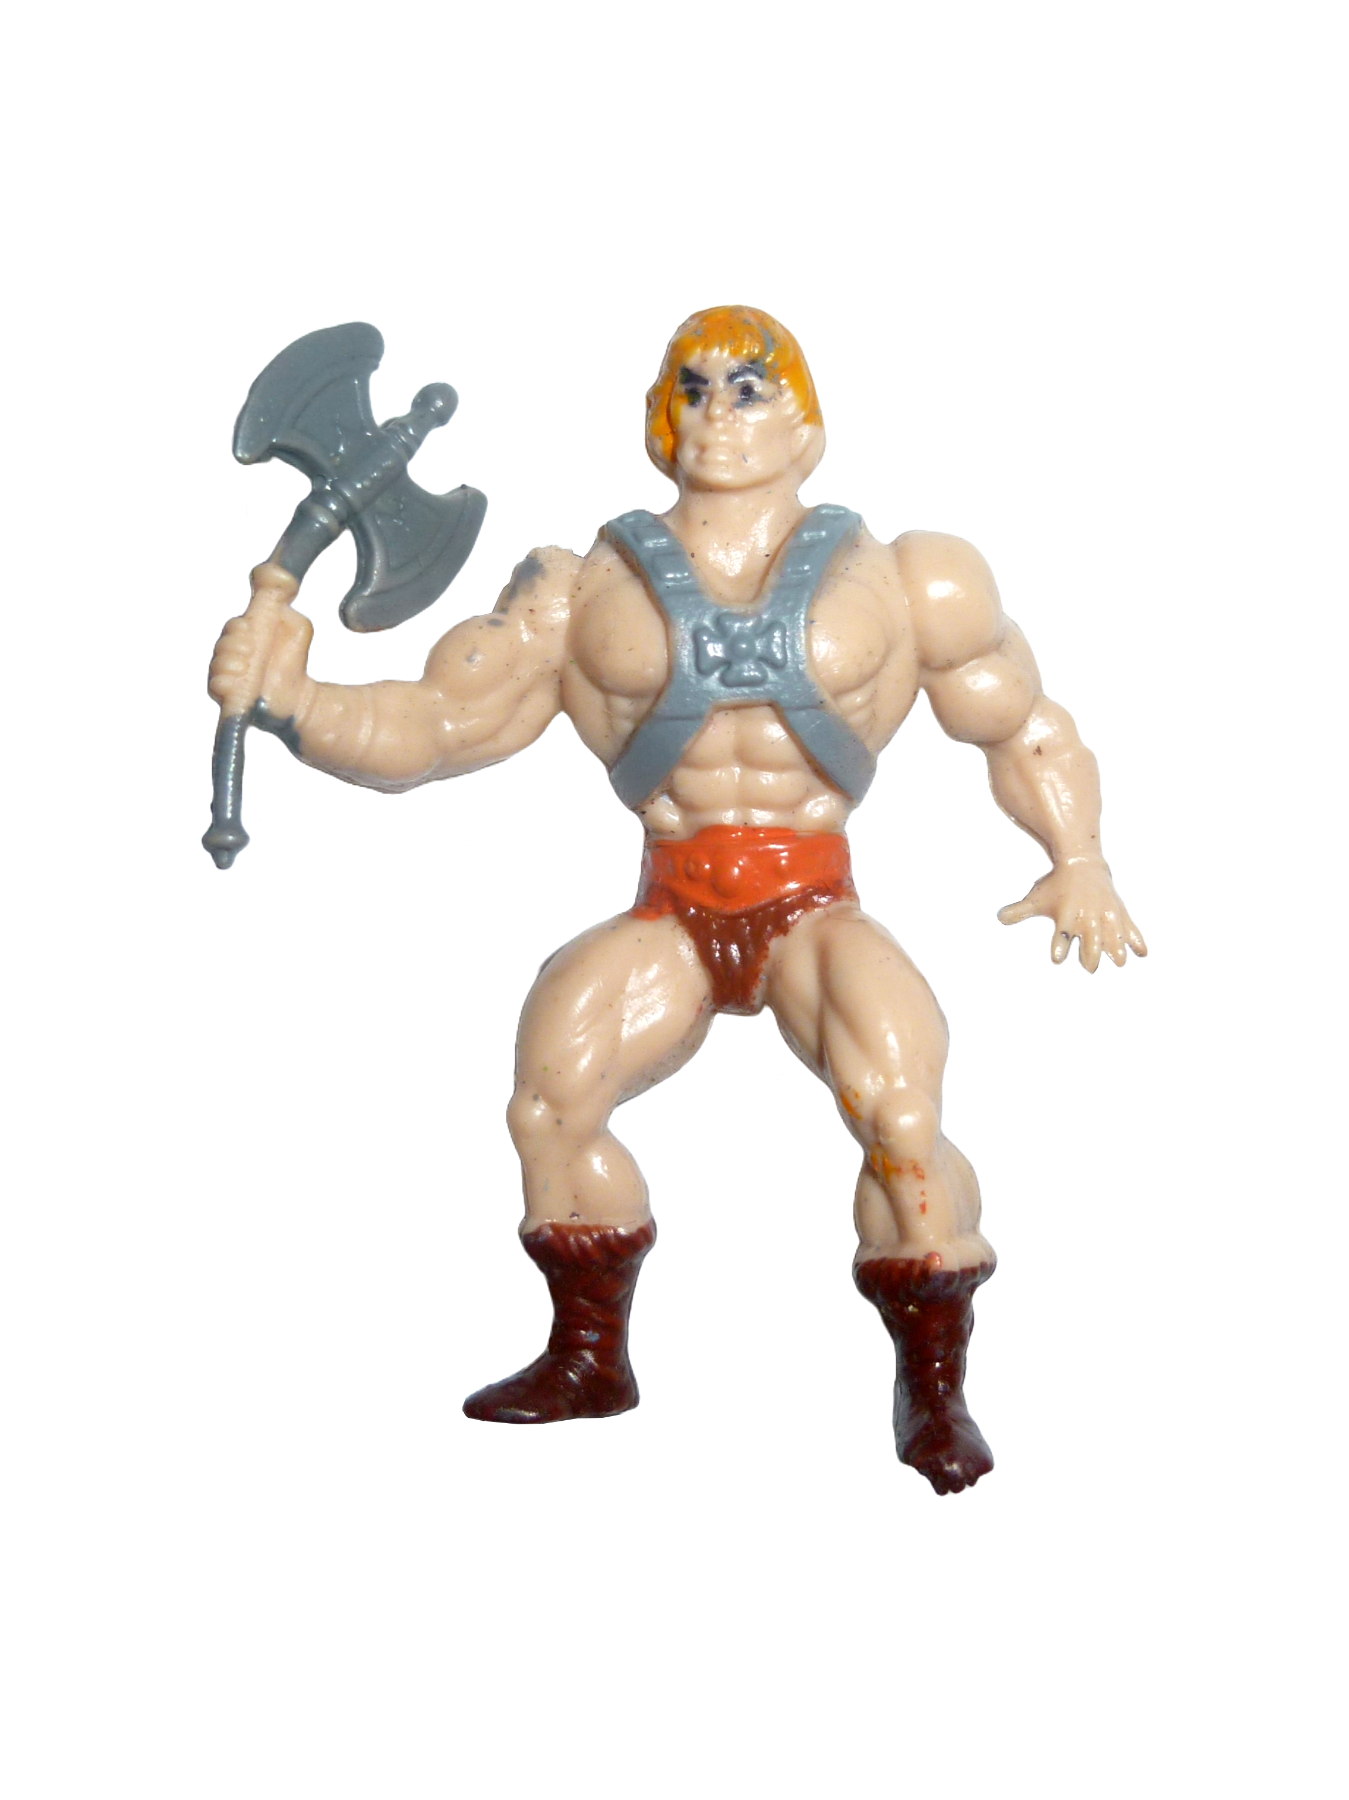 He-Man - small cake figure with axe